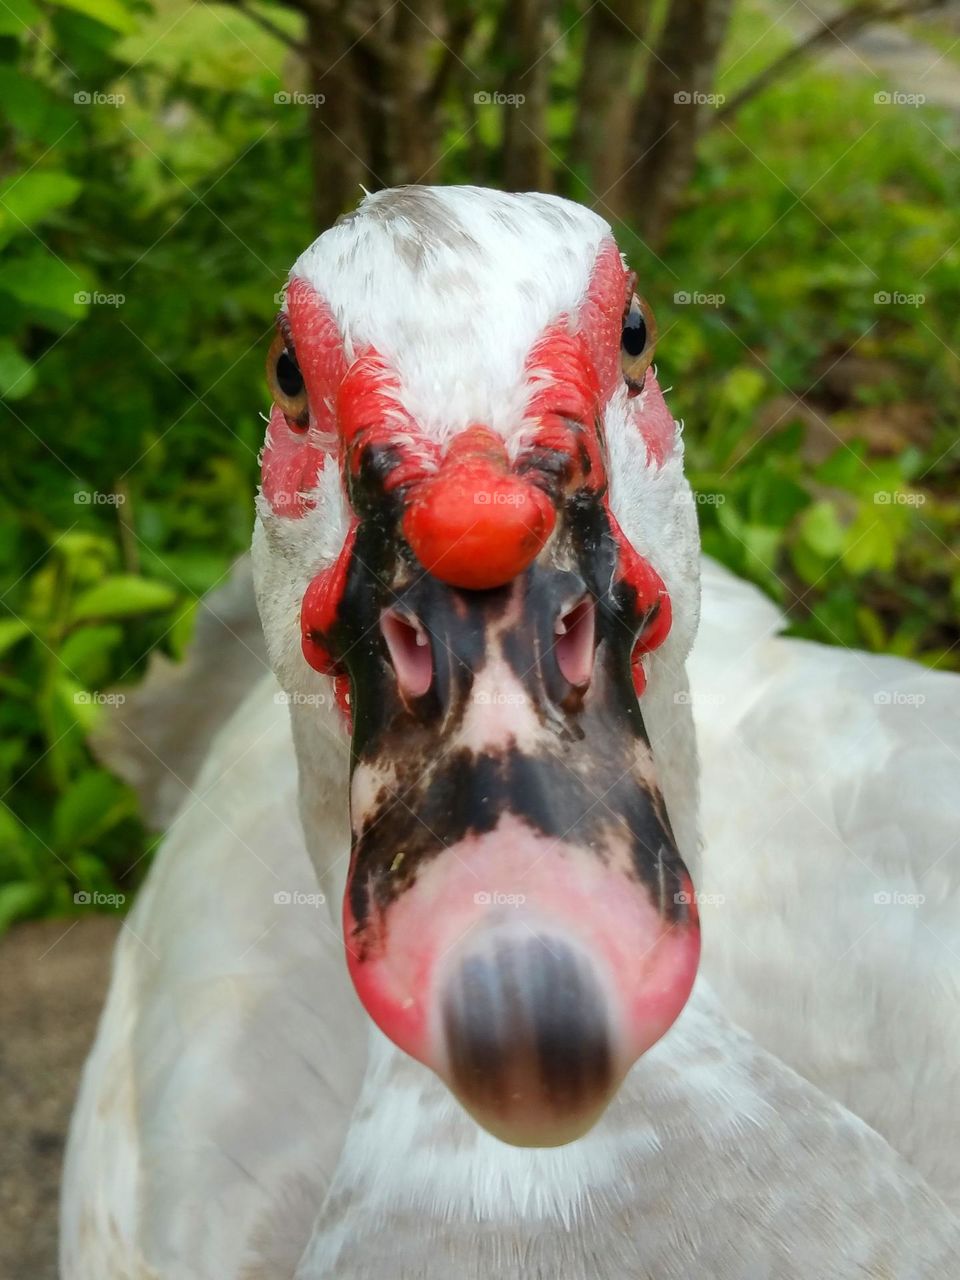 Male Muscovy duck close-up